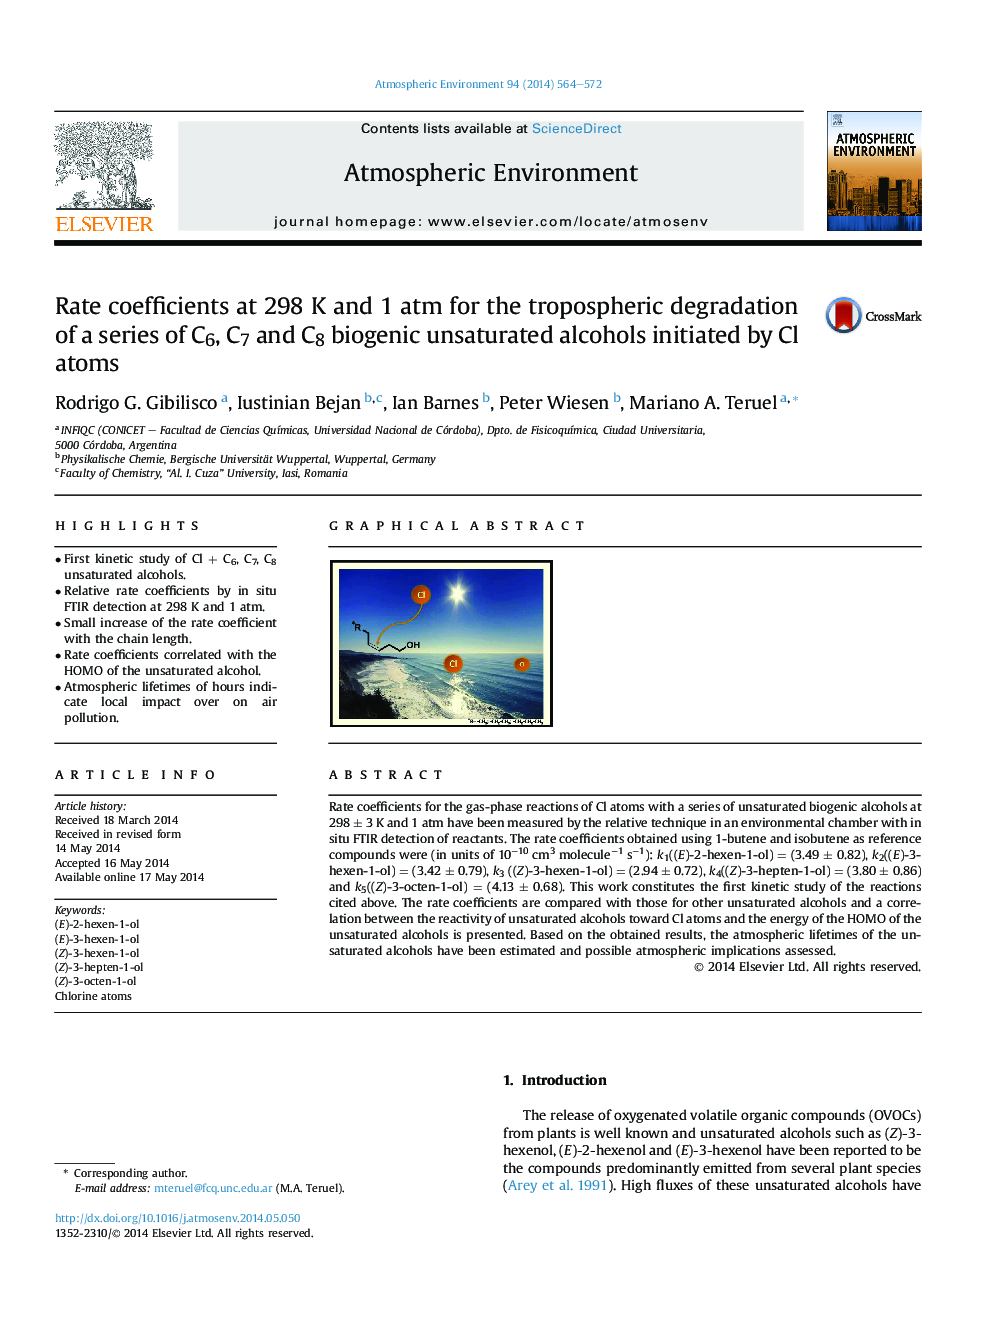 Rate coefficients at 298Â K and 1Â atm for the tropospheric degradation of a series of C6, C7 and C8 biogenic unsaturated alcohols initiated by Cl atoms